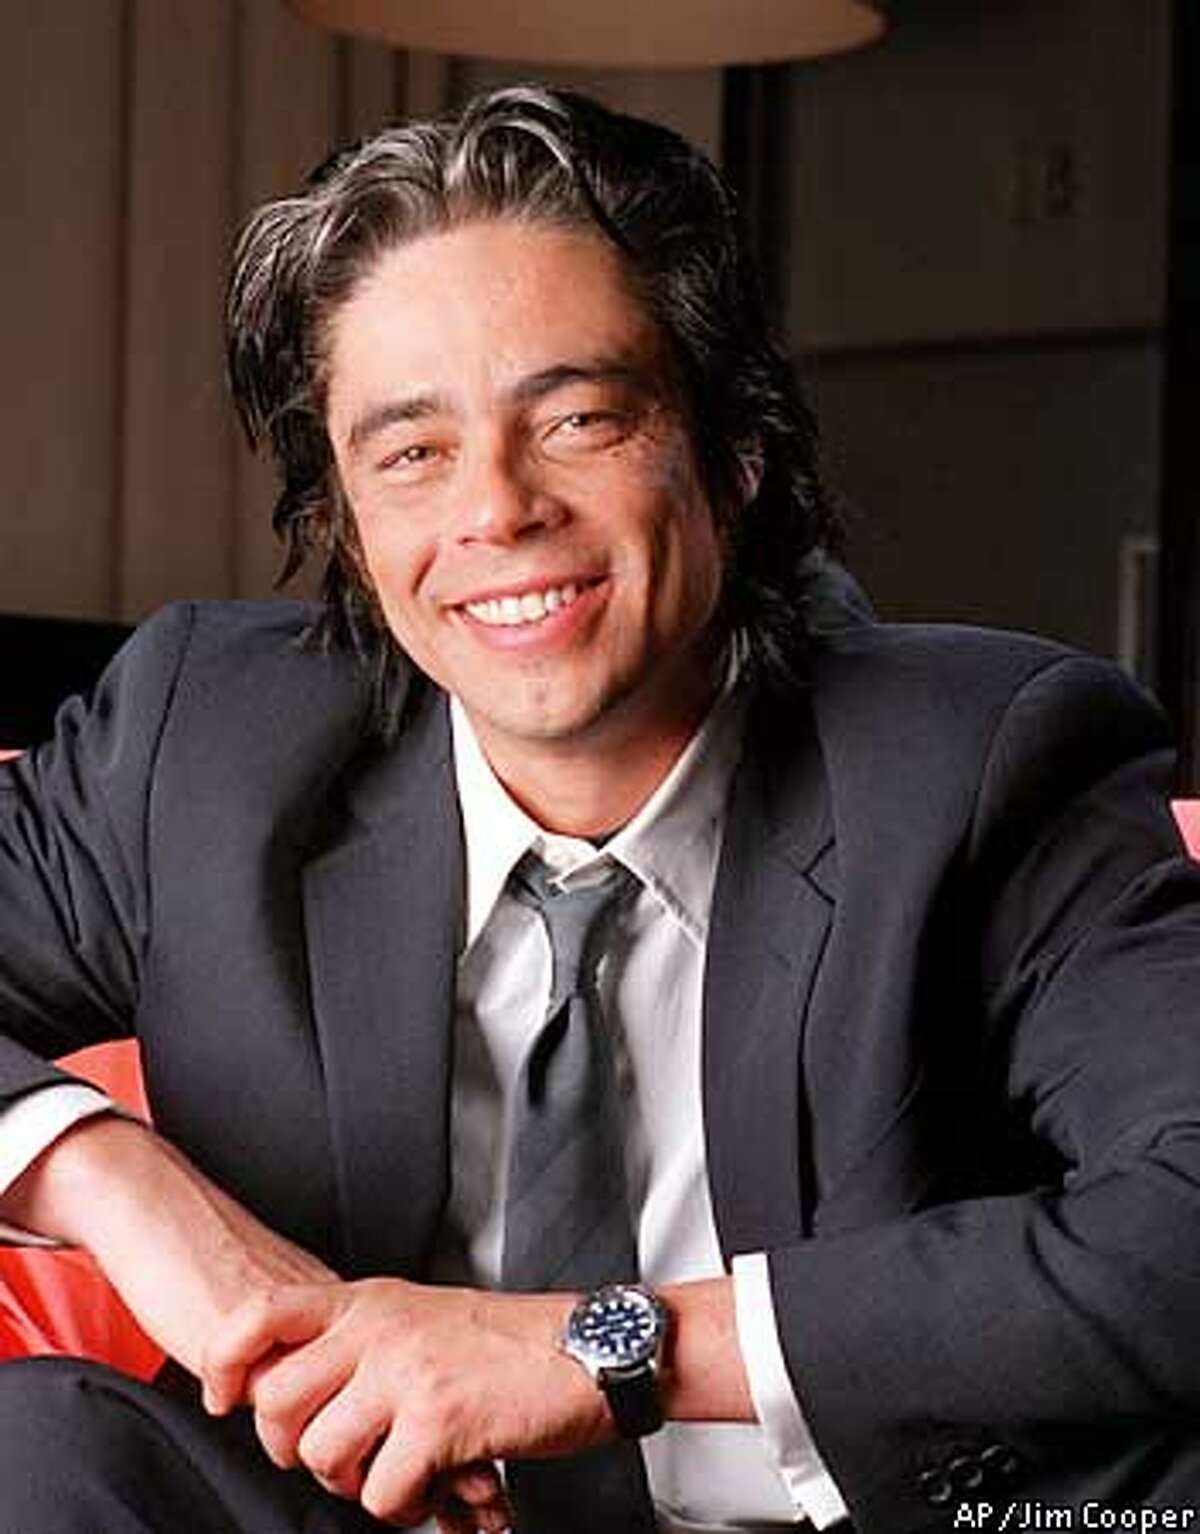 ADVANCE FOR WEEKEND EDITIONS, JAN. 18-21--Actor Benicio Del Toro poses for a photo in New York, Jan. 4, 2001. In Steven Soderbergh's "Traffic," Del Toro, 33, plays weary Tijuana police officer Javier Rodriguez, a role that garnered him the Golden Globe nomination for best supporting actor, a category that includes Jeff Bridges, Willem Dafoe and Albert Finney. He also can be seen in Guy Ritchie's "Snatch," which stars Brad Pitt. (AP Photo/Jim Cooper)